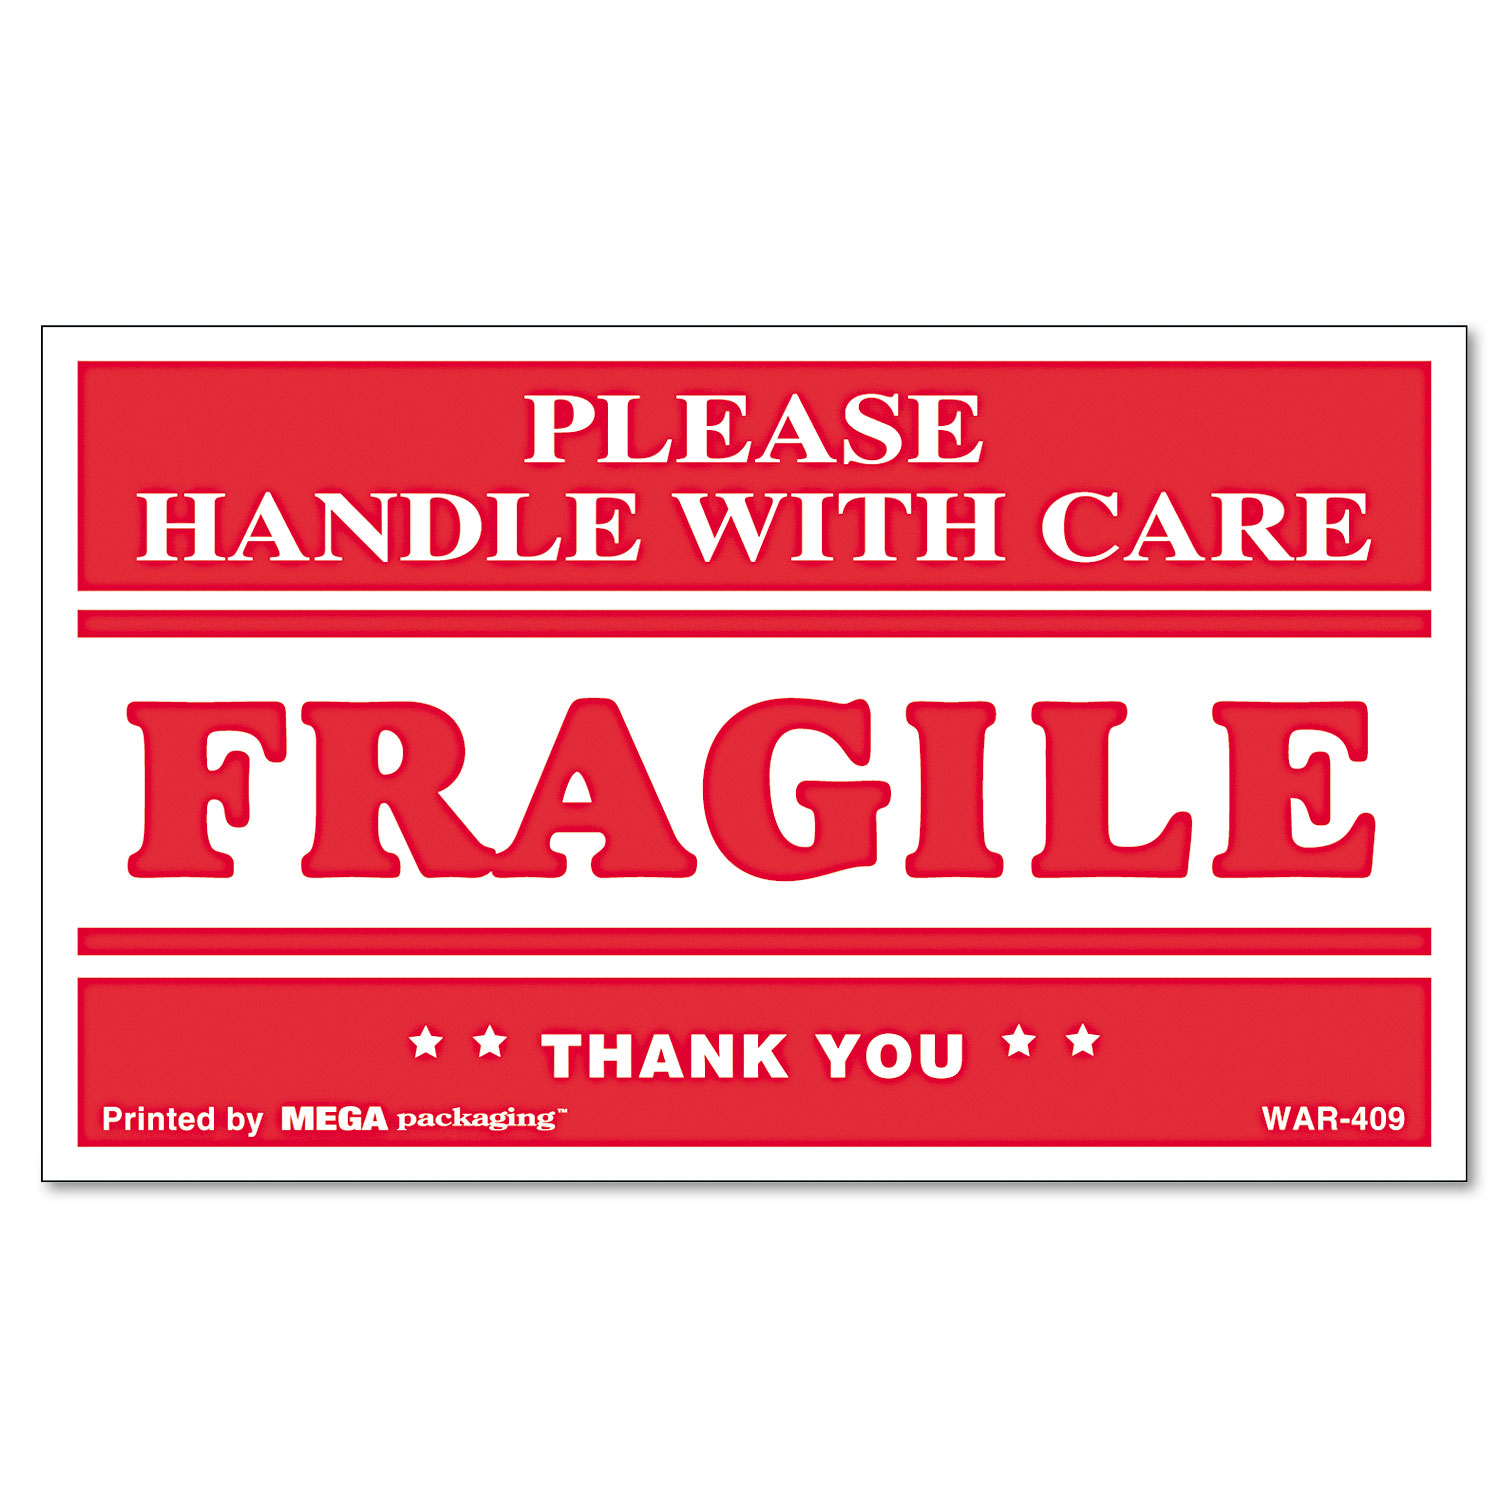  Universal UNV308383 Printed Message Self-Adhesive Shipping Labels, FRAGILE Handle with Care, 3 x 5, Red/Clear, 500/Roll (UNV308383) 